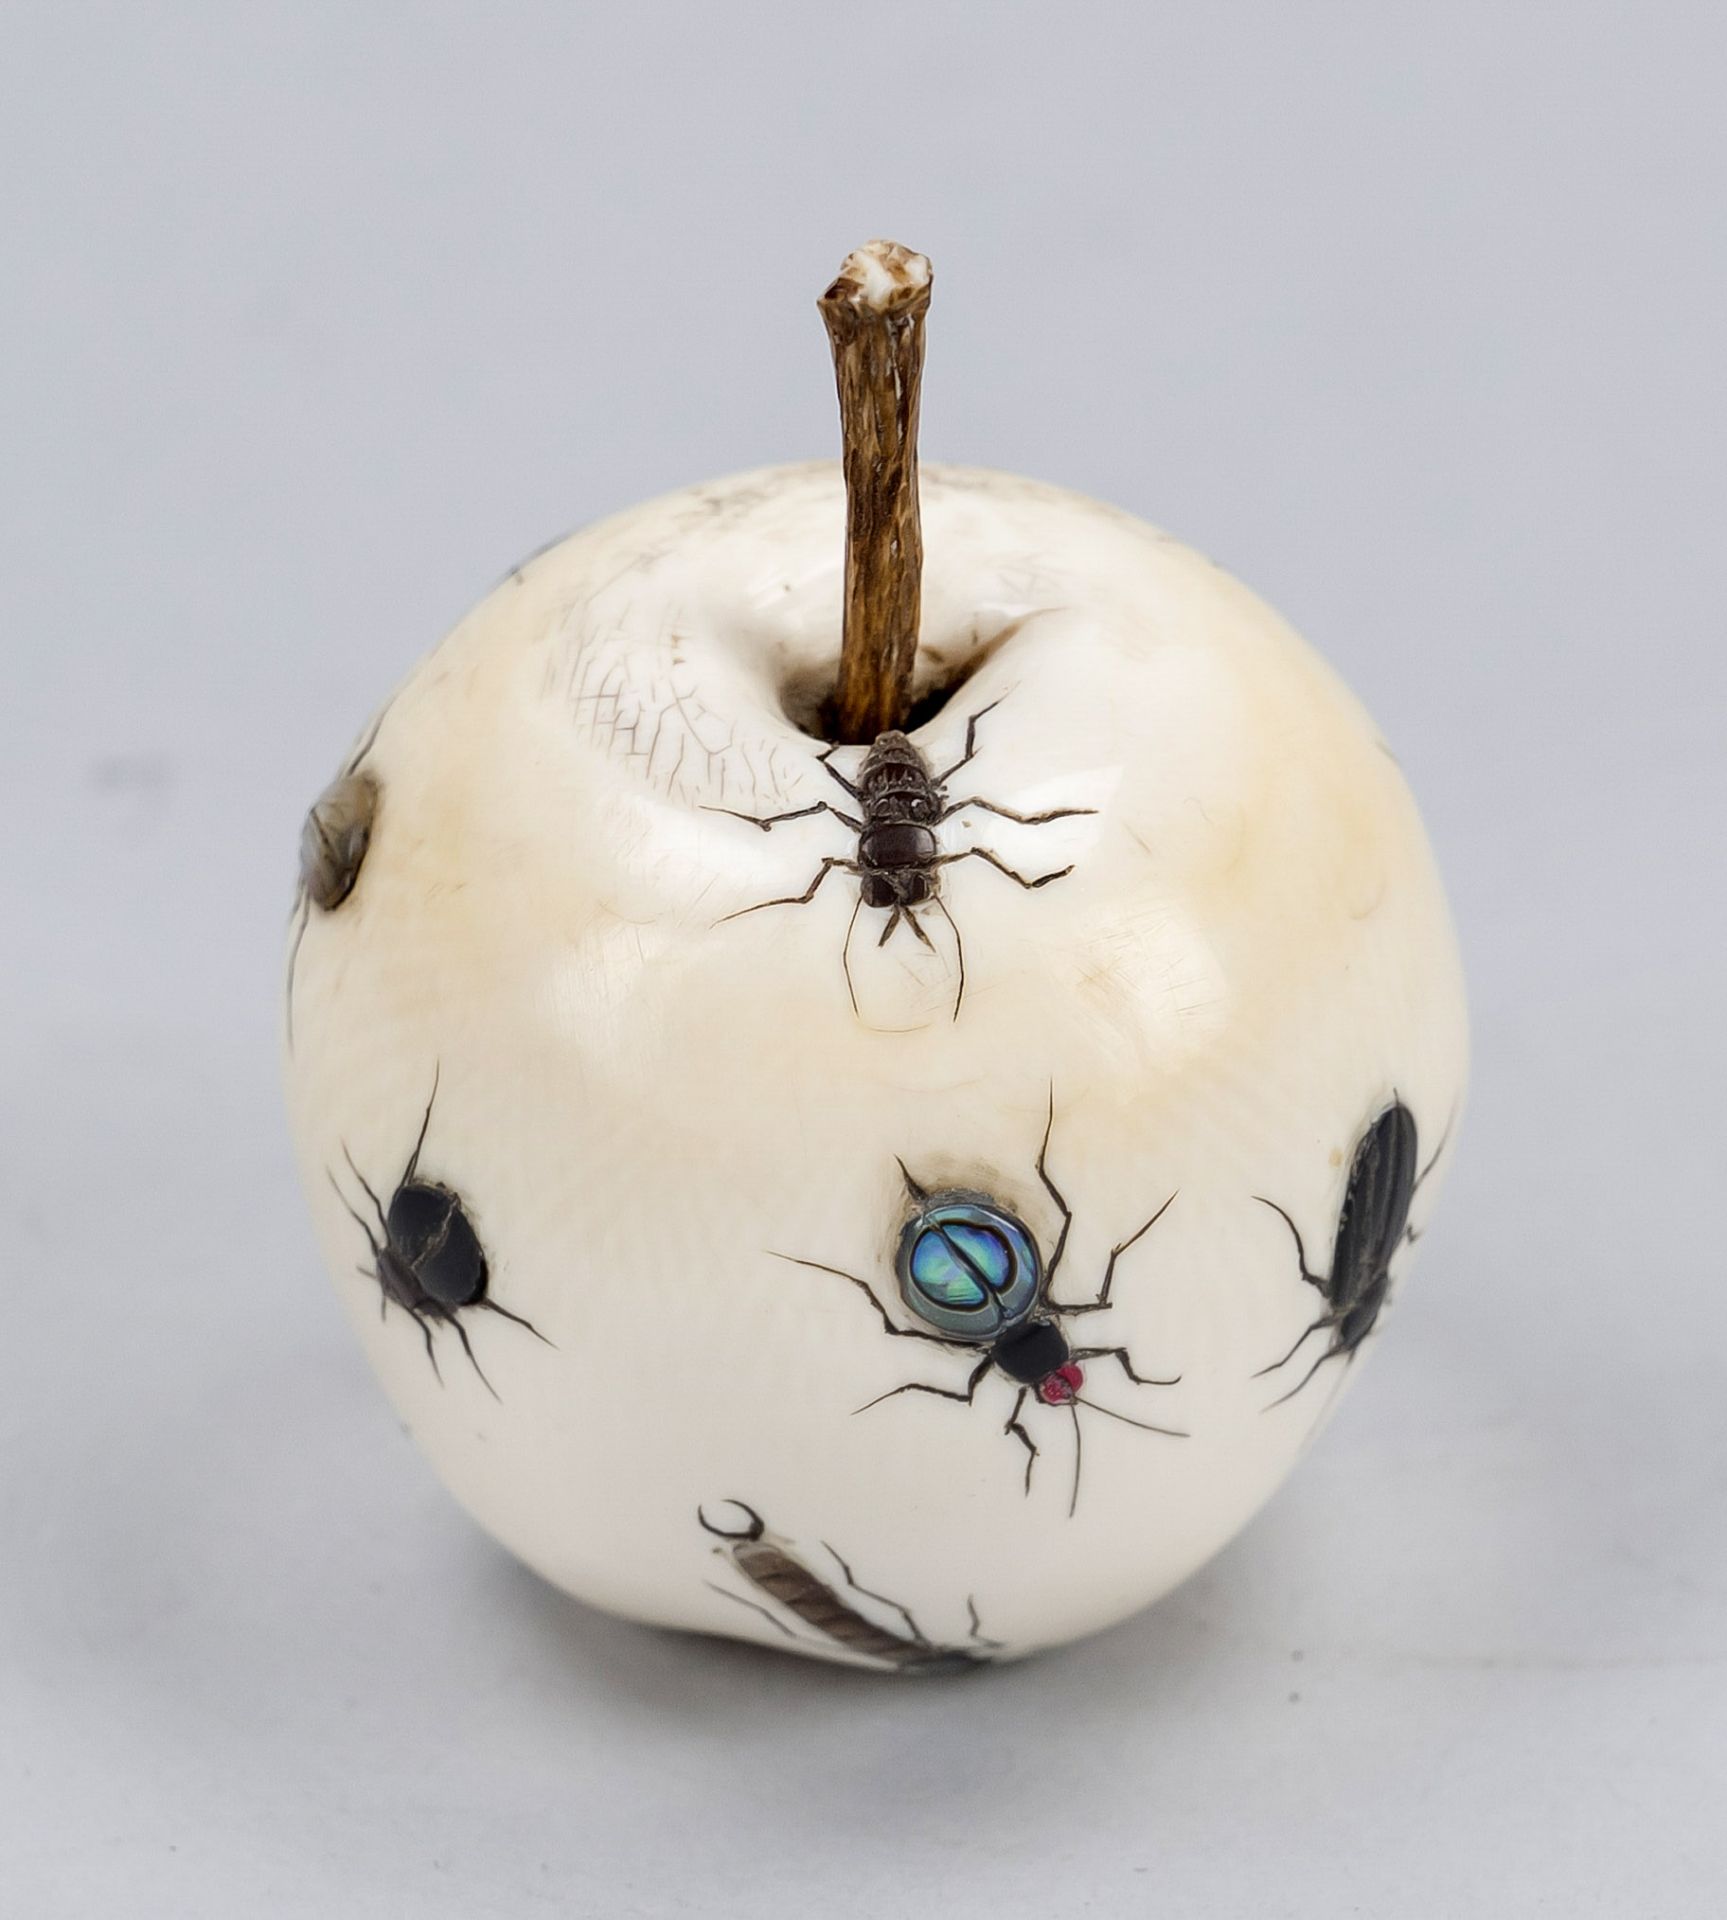 Shibayama Okimono as an apple, Japan c. 1900 (Meiji), ivory with mother-of-pearl and stone inlays. - Image 2 of 4